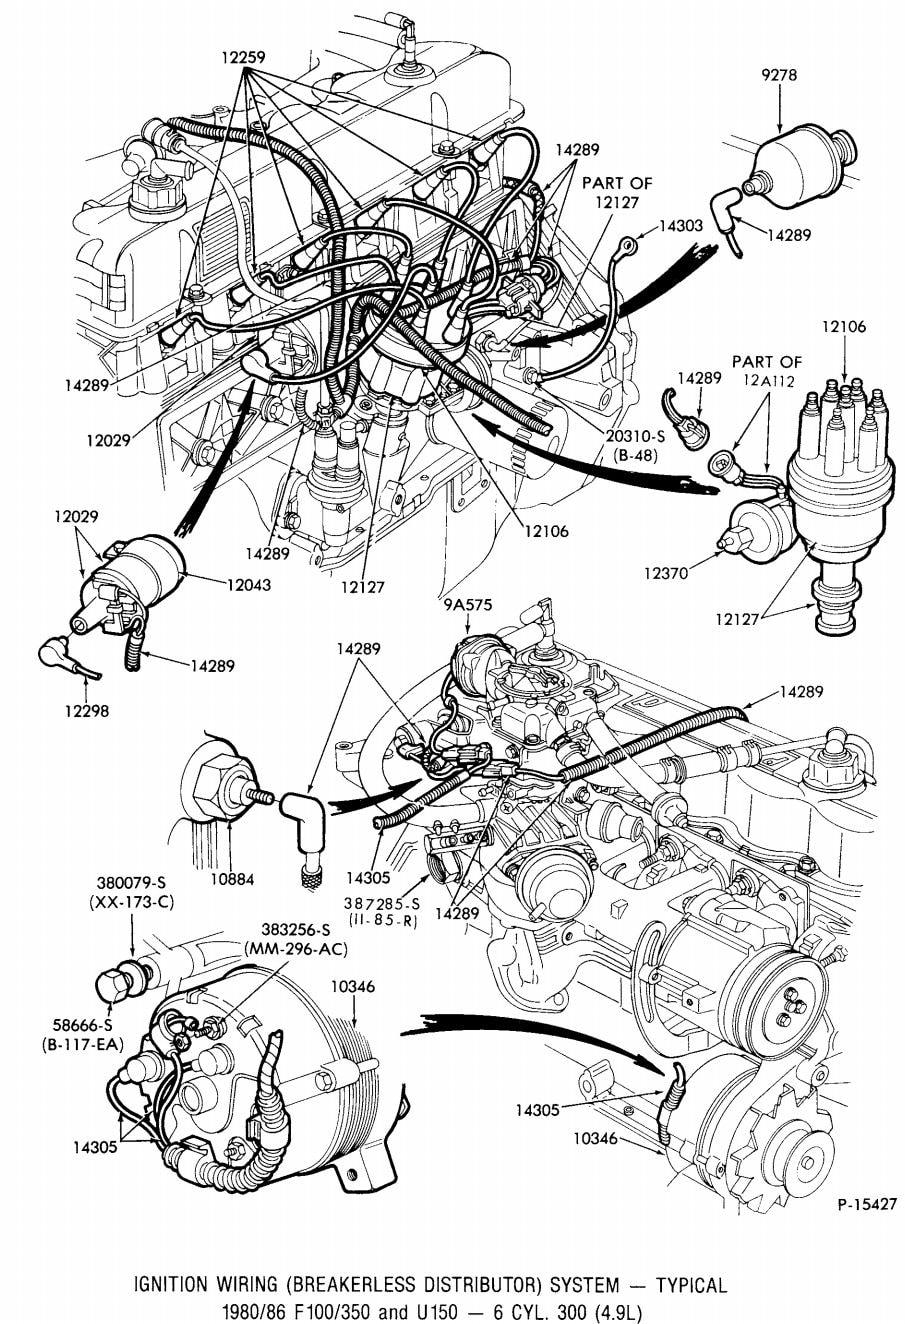 Bullnose 300 Six Ignition Wiring